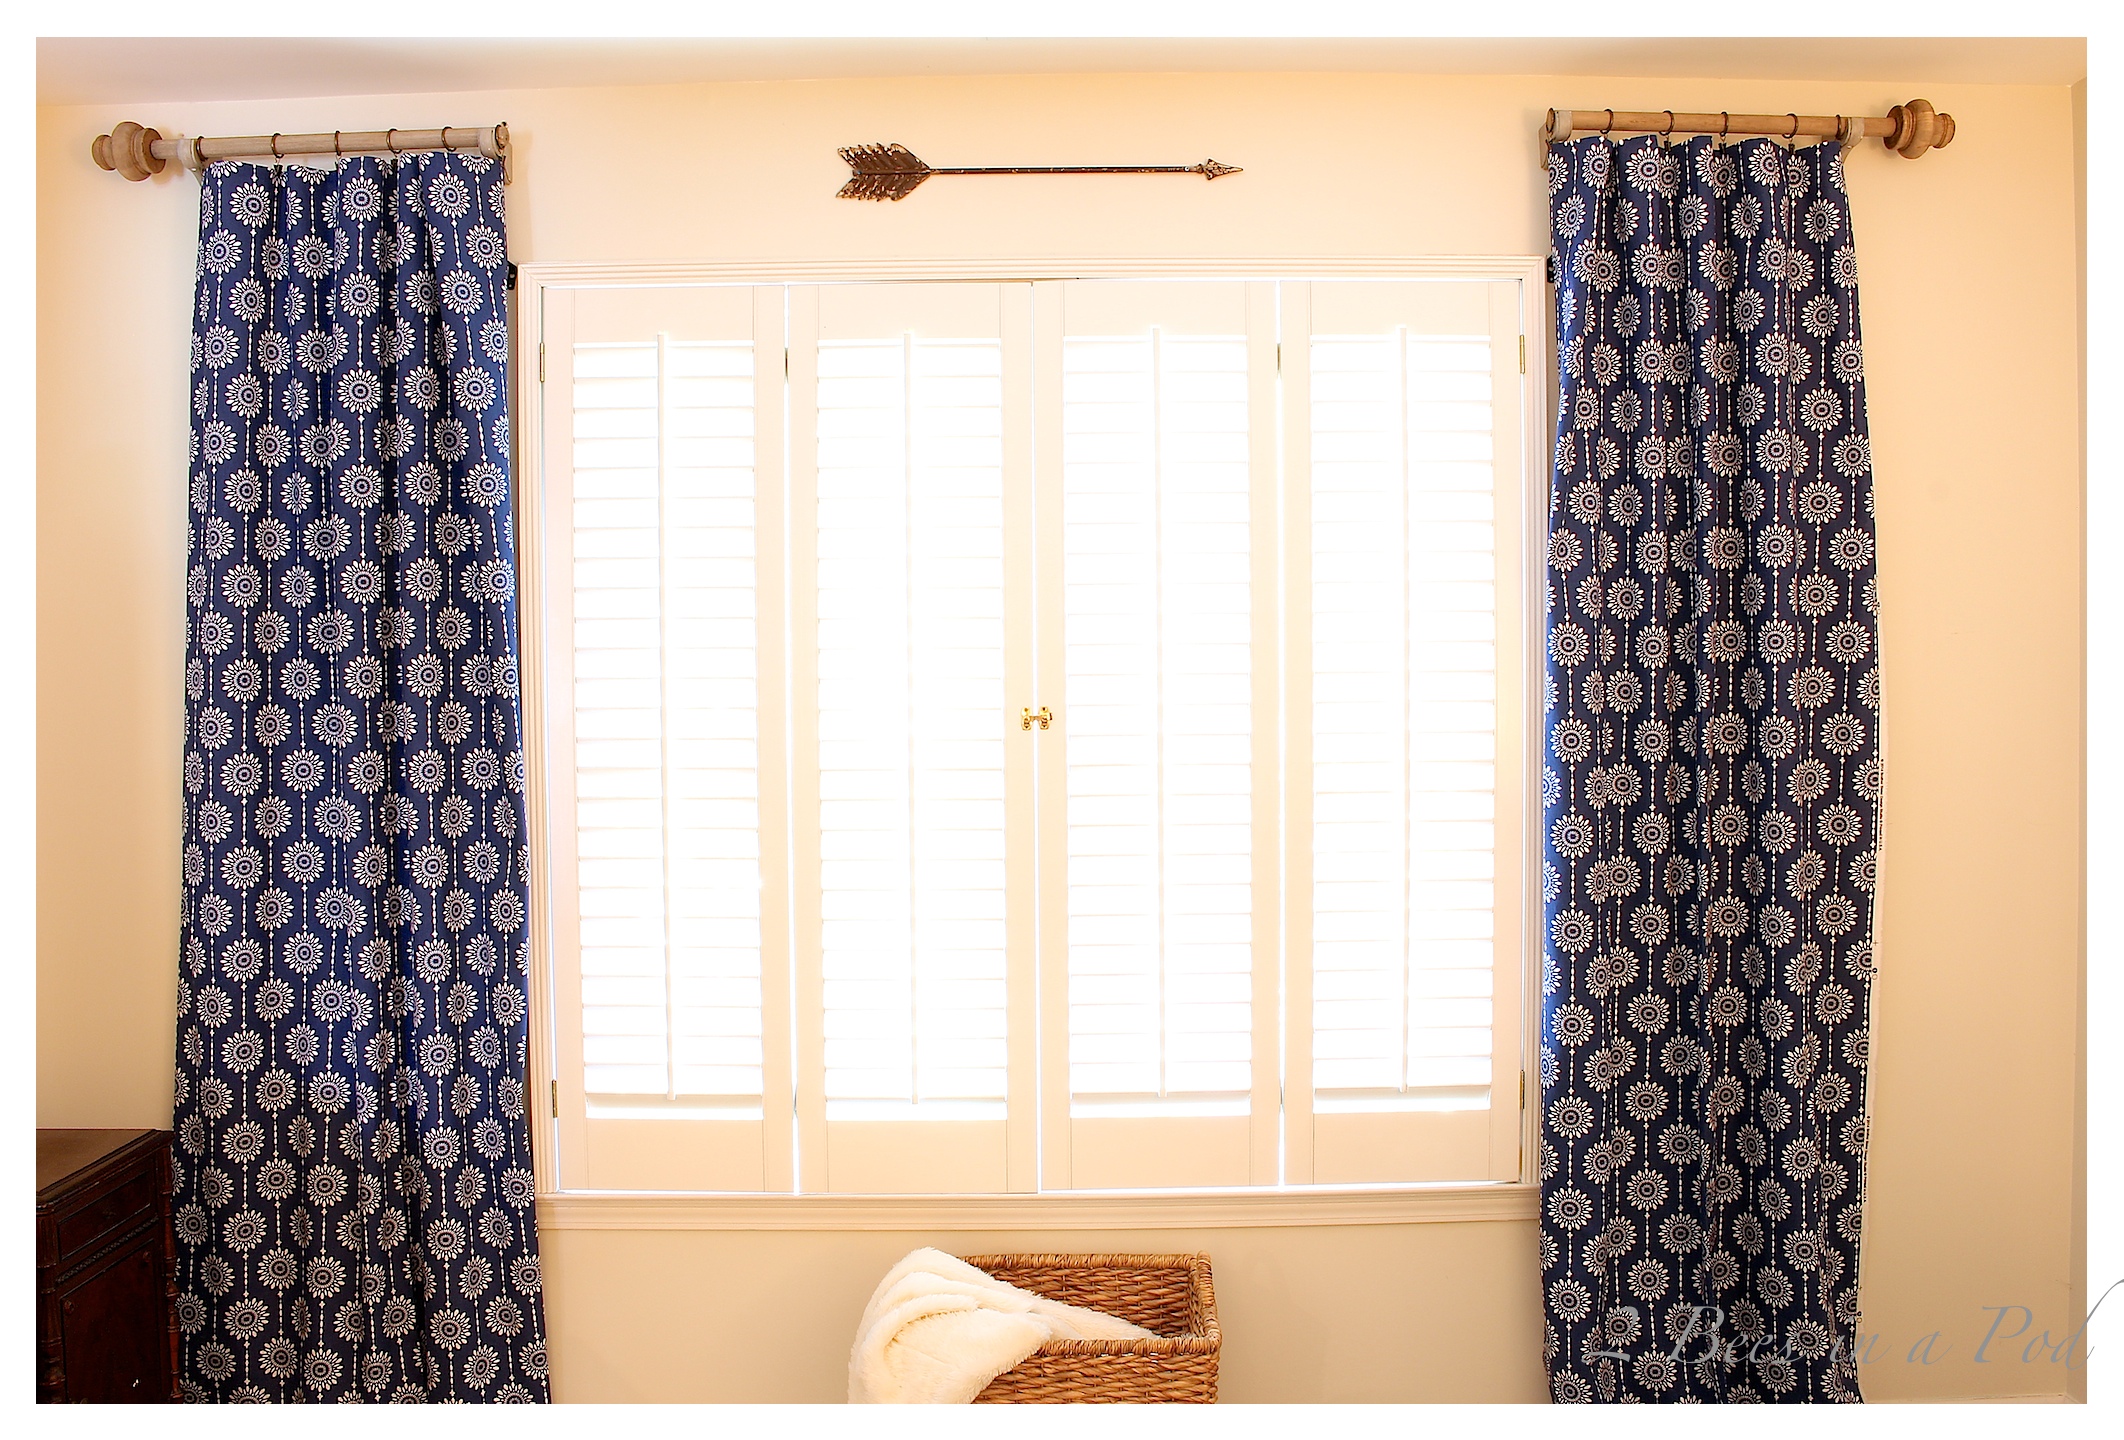 DIY Curtain rods using furniture "feet" and a broomstick. By using Weatherwood stain it looks like barn wood or driftwood.